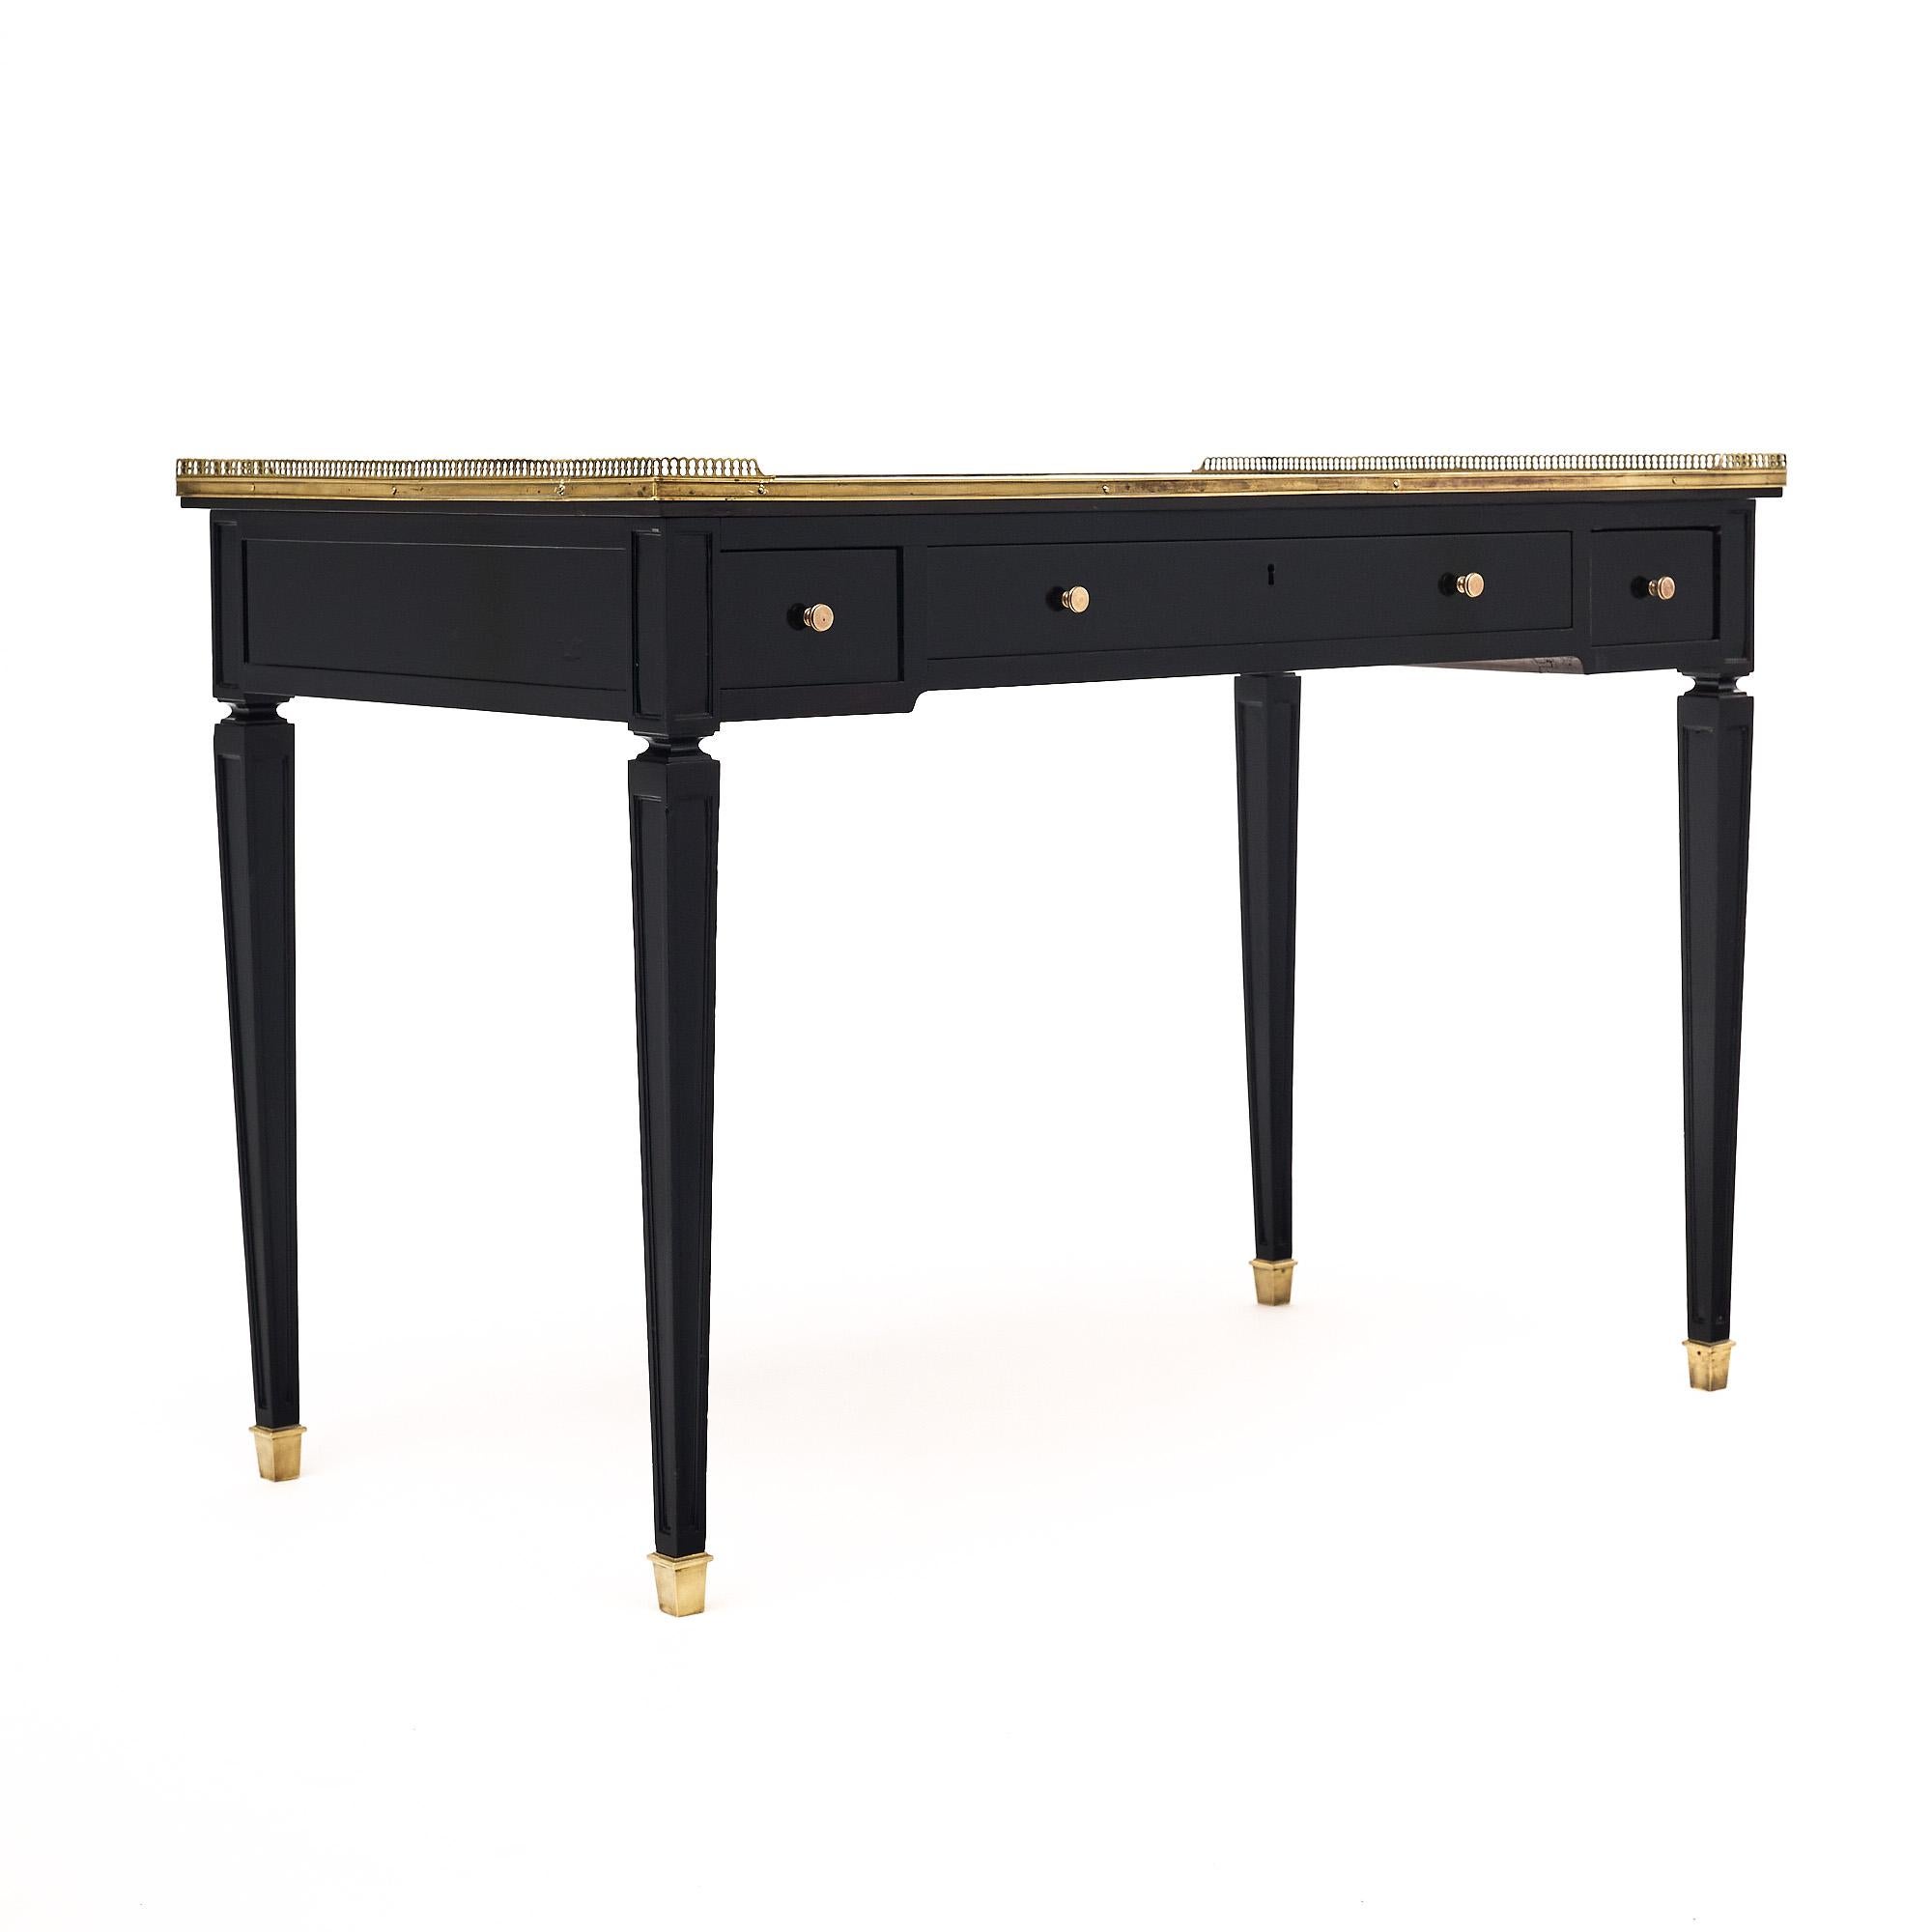 Writing desk from France in the Louis XVI style. This piece has been ebonized and finished with a lustrous French polish of museum-quality. There are four dovetailed drawers each with a brass knob. The tapered legs are capped in brass and the top is